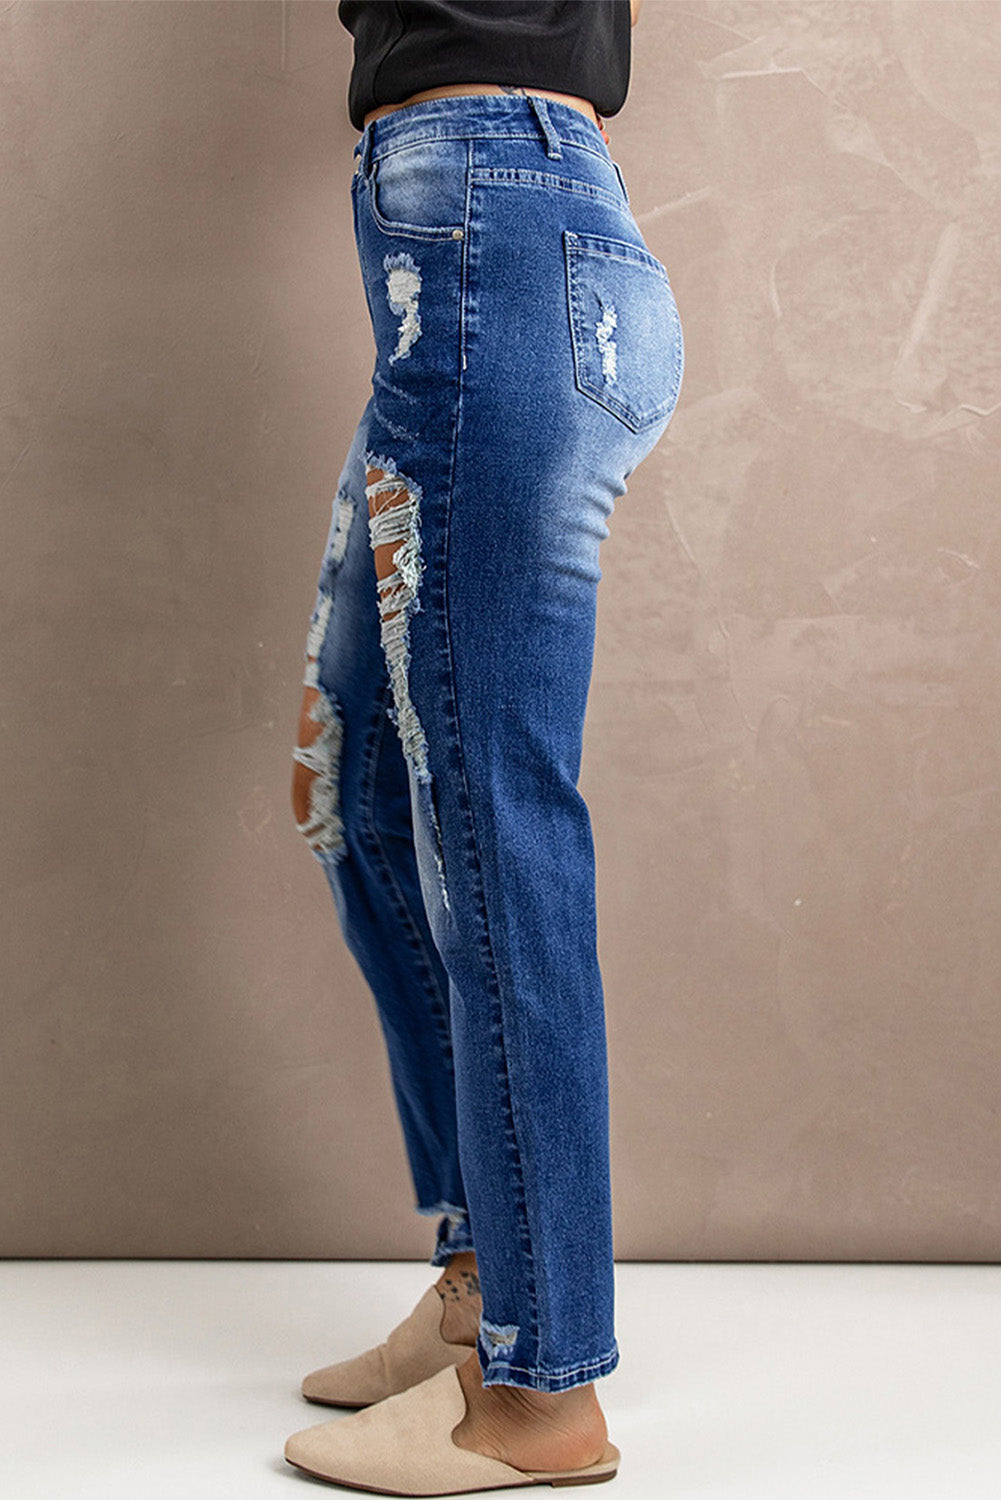 Distressed High-Rise Jeans with Pockets - DromedarShop.com Online Boutique